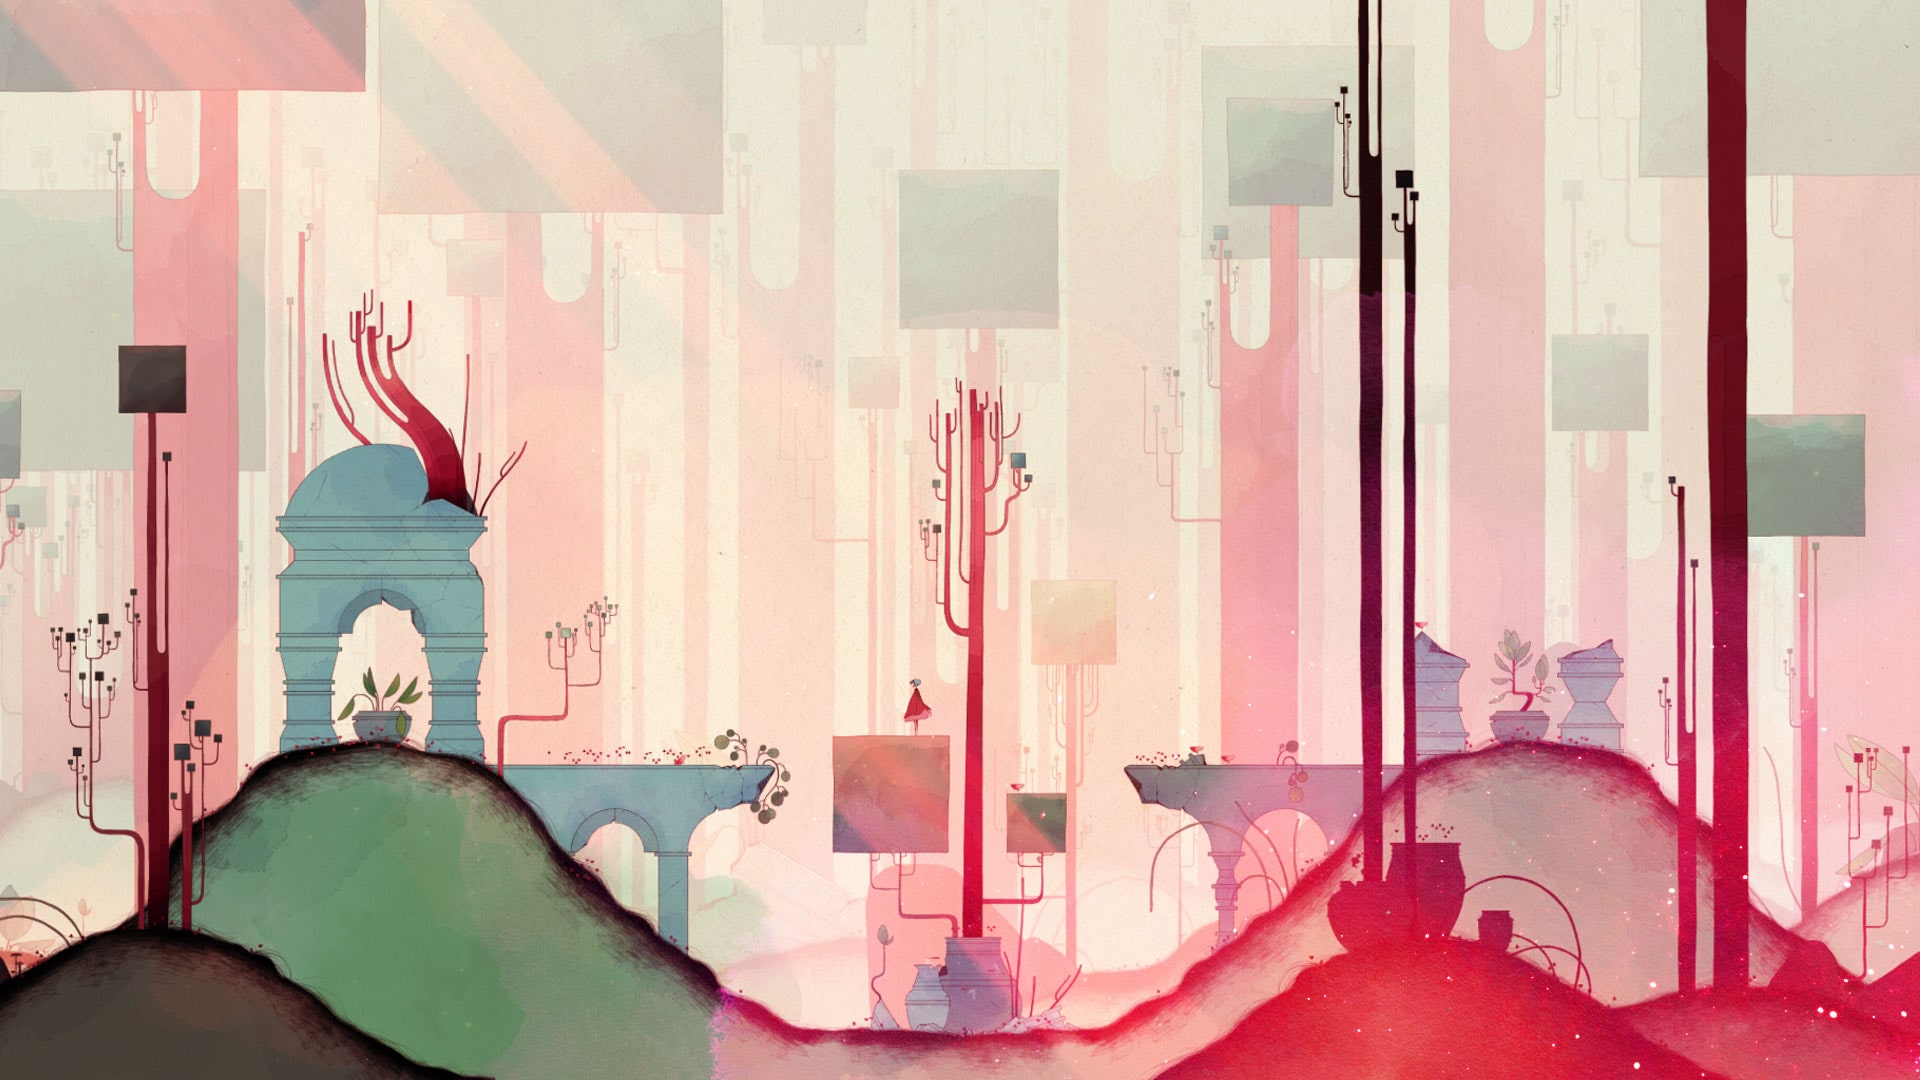 Gris (Digital Download Game): PC $3.74, Nintendo Switch & PS4/PS5 Versions Each $4.24